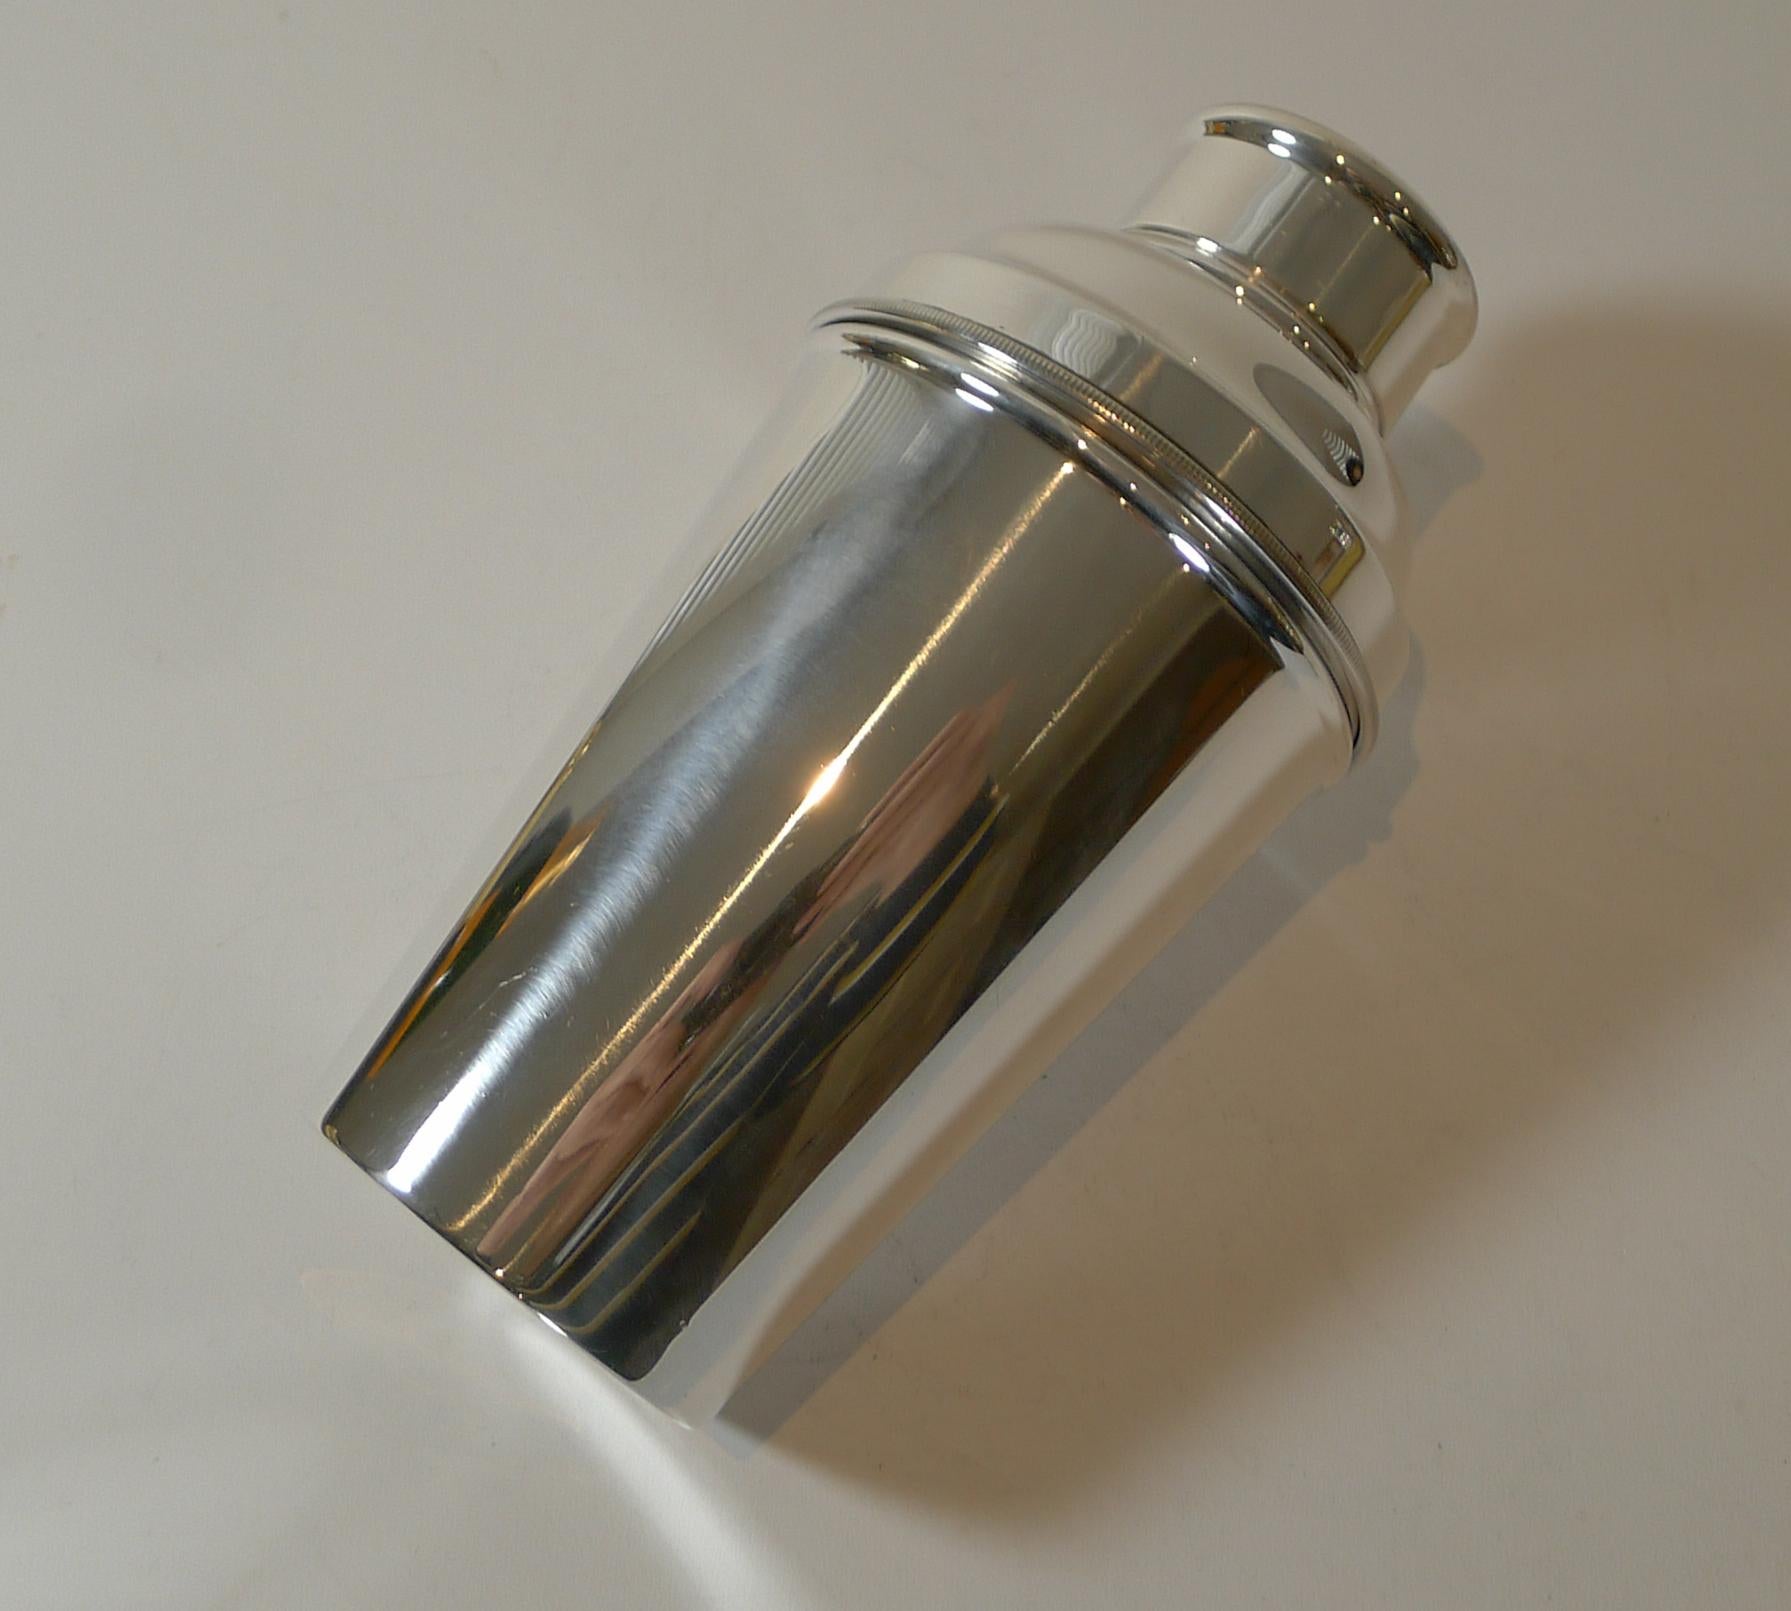 Art Deco Large 1 1/2 Pint Silver Plated Cocktail Shaker by Suckling Ltd. c.1930